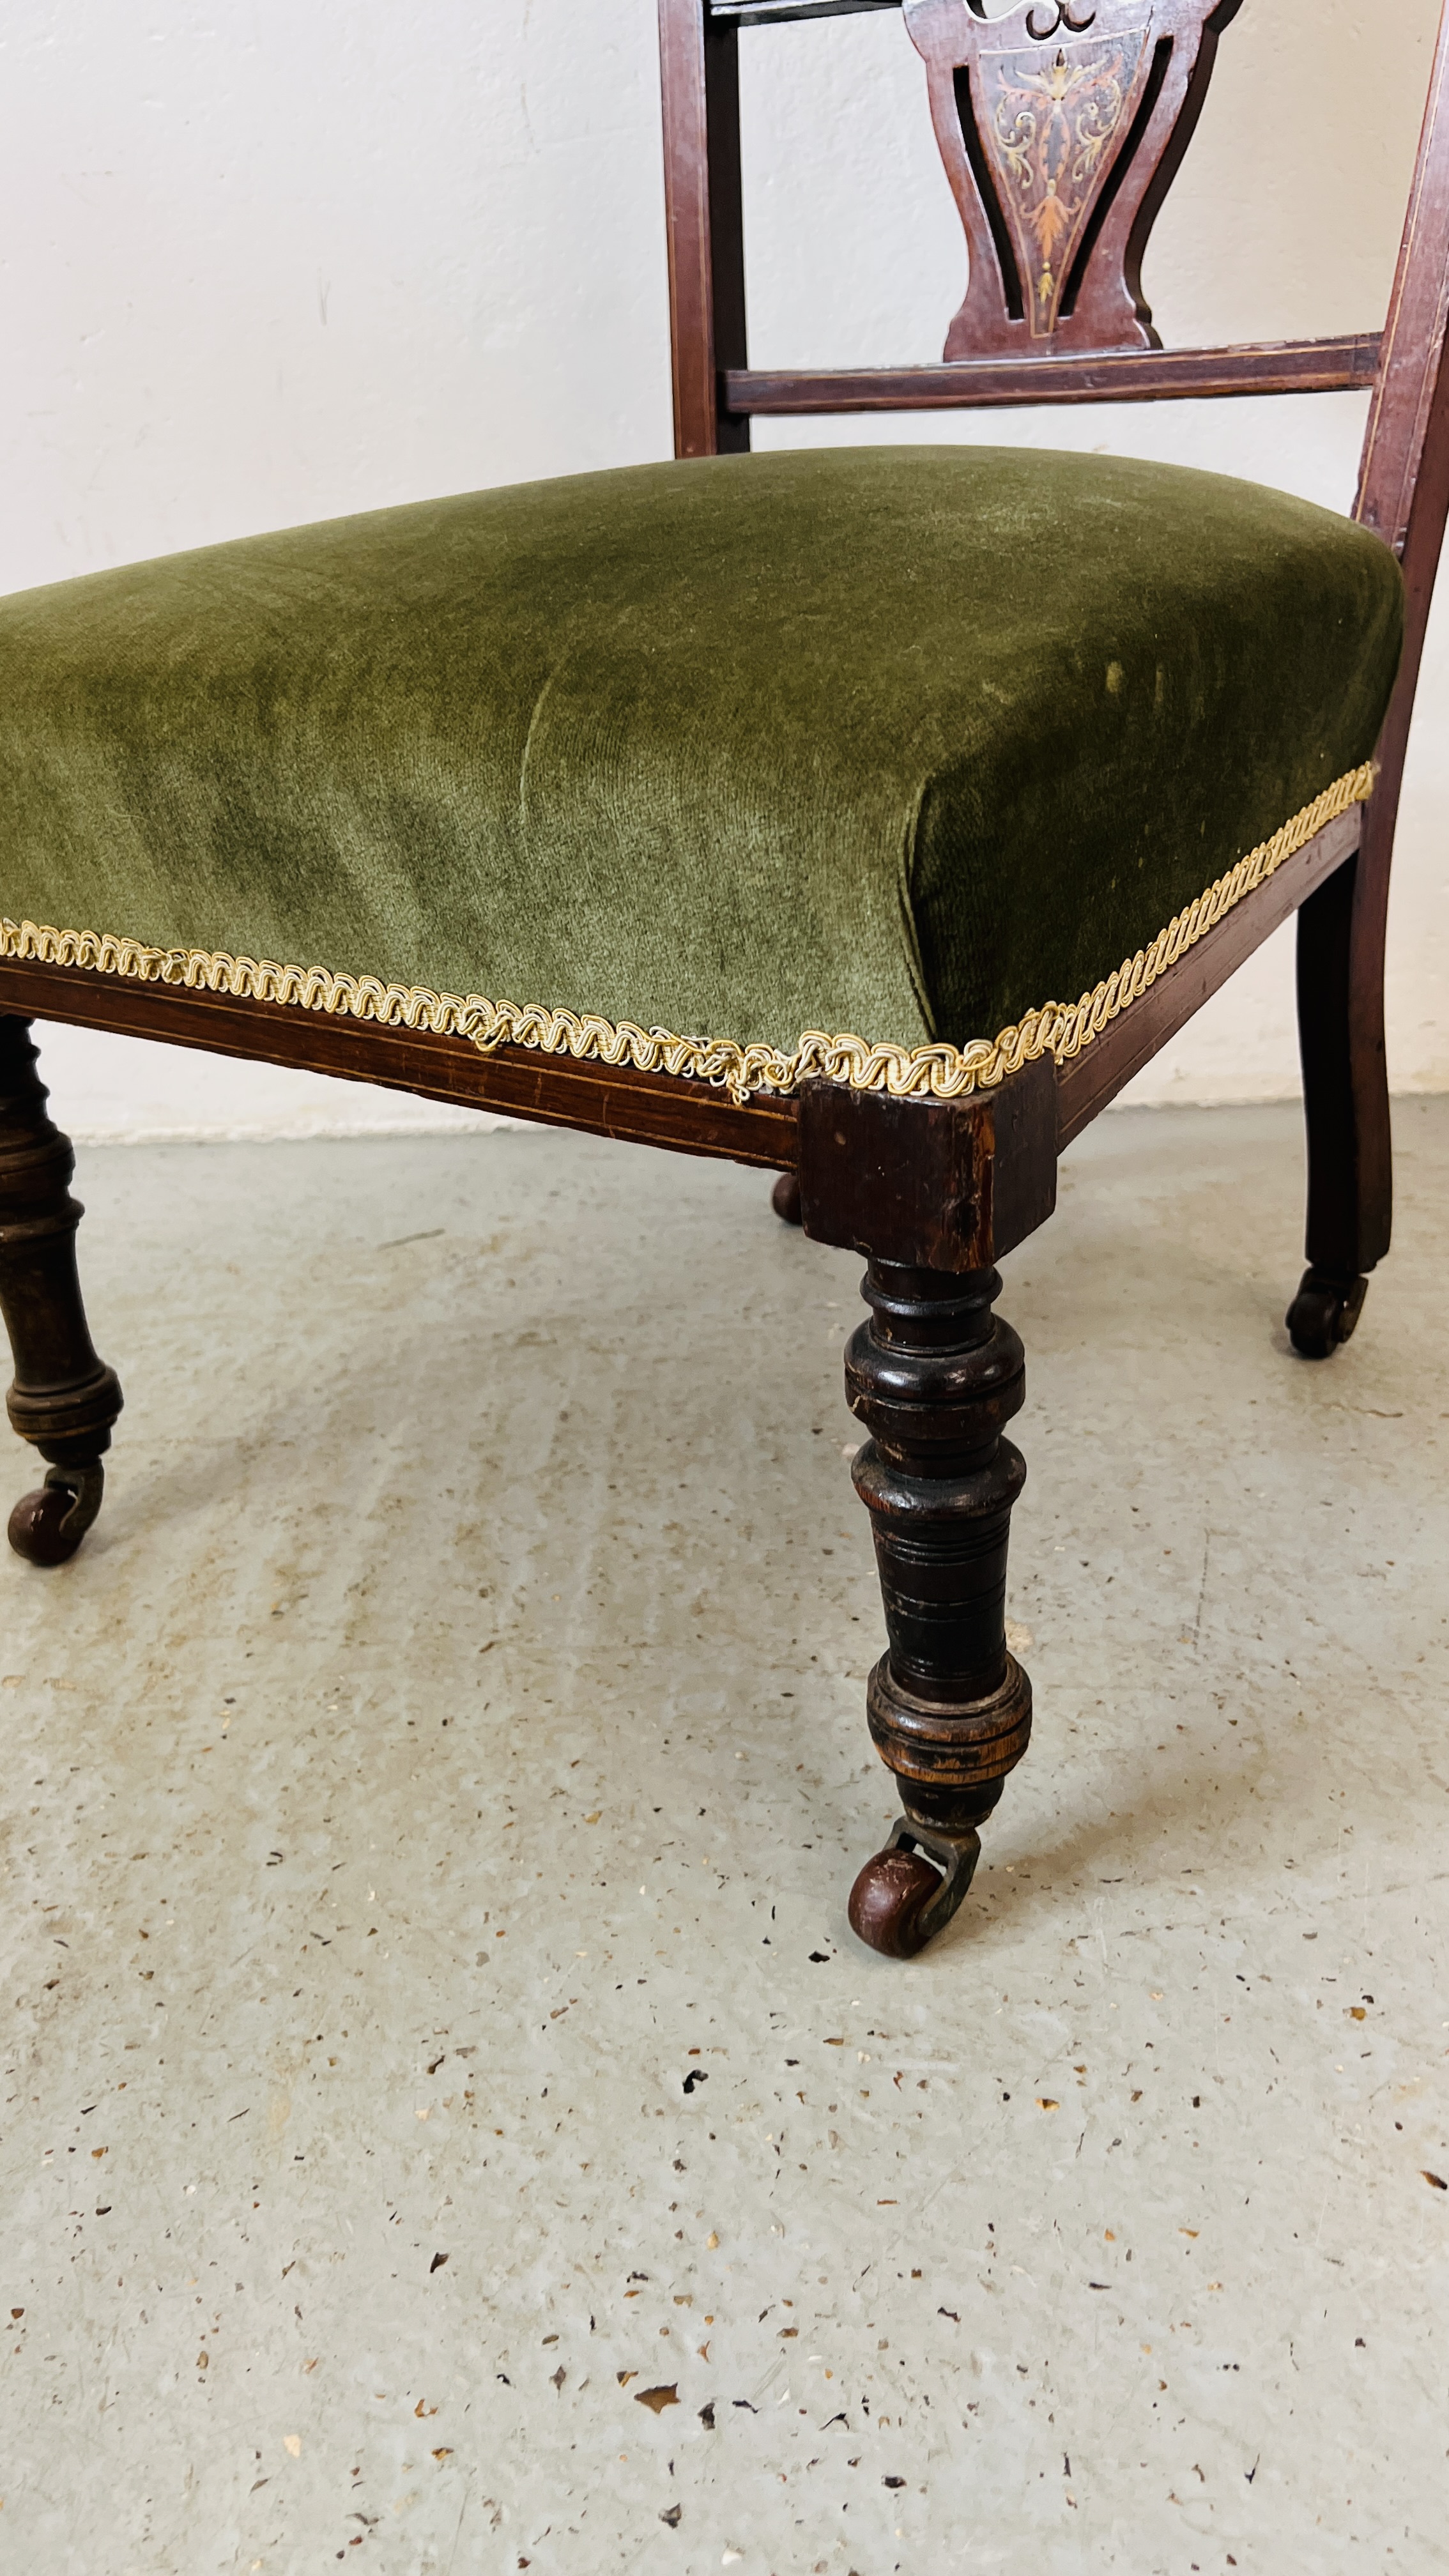 AN ANTIQUE EDWARDIAN INLAID FRET WORK DETAIL GREEN UPHOLSTERED CHAIR. - Image 3 of 7